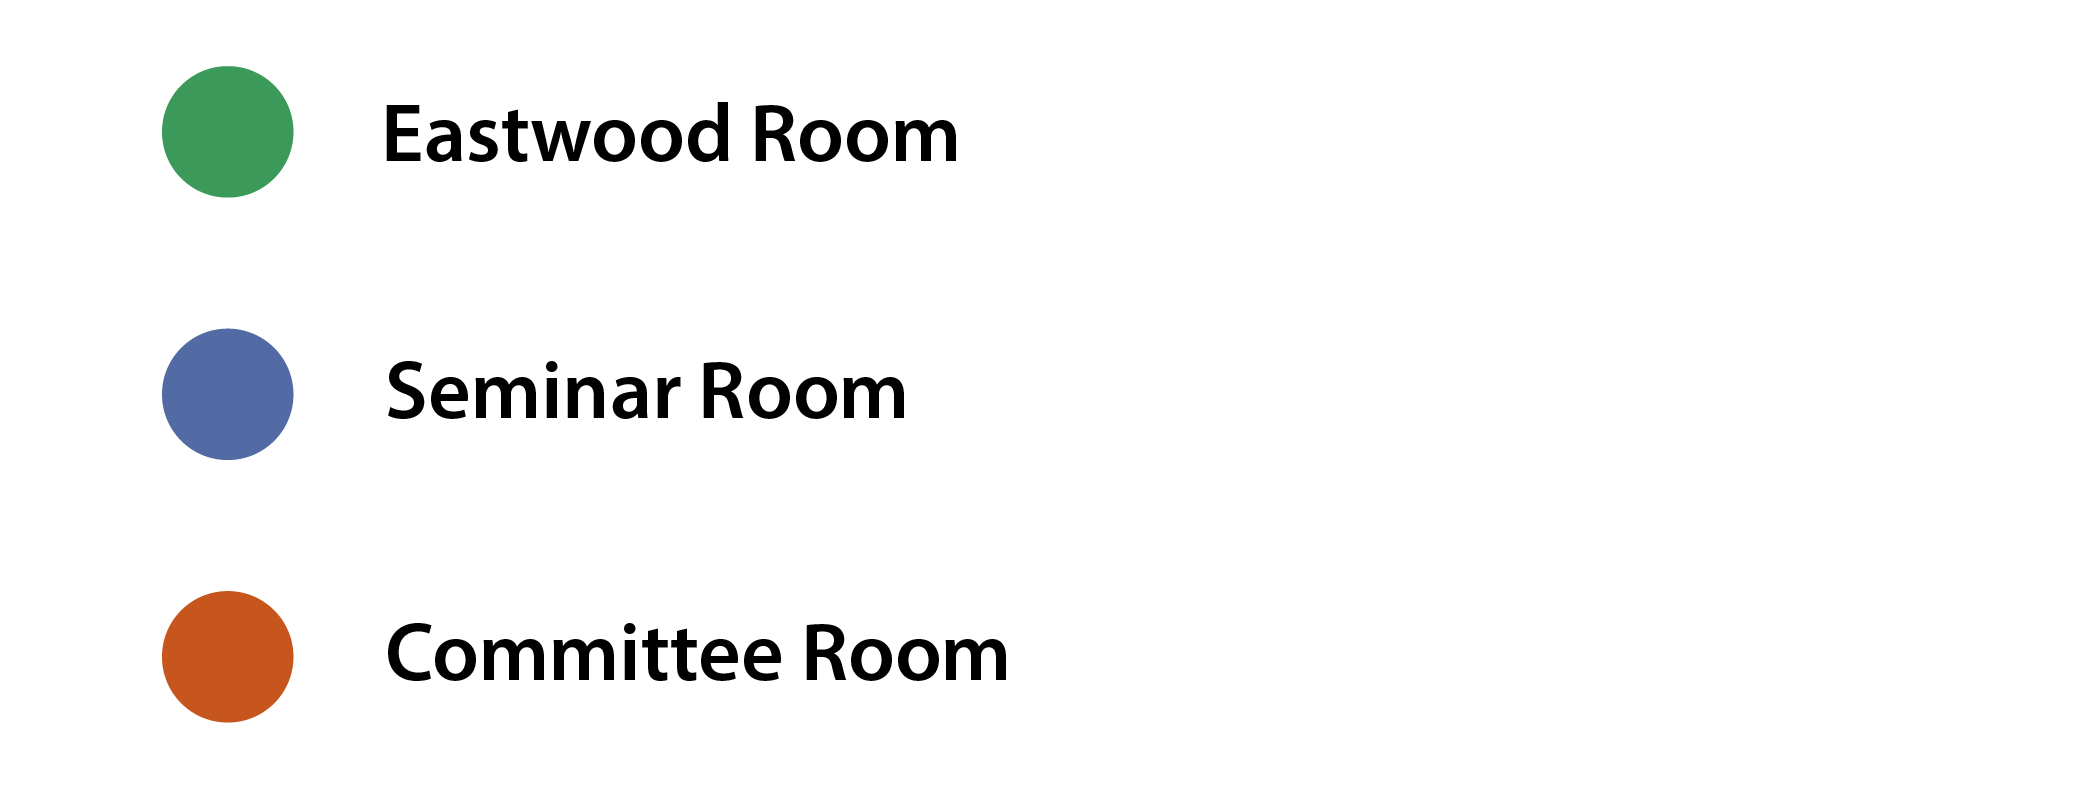 Calendar key: green for the Eastwood Room, blue for the Seminar Room, and orange for the Committee Room.